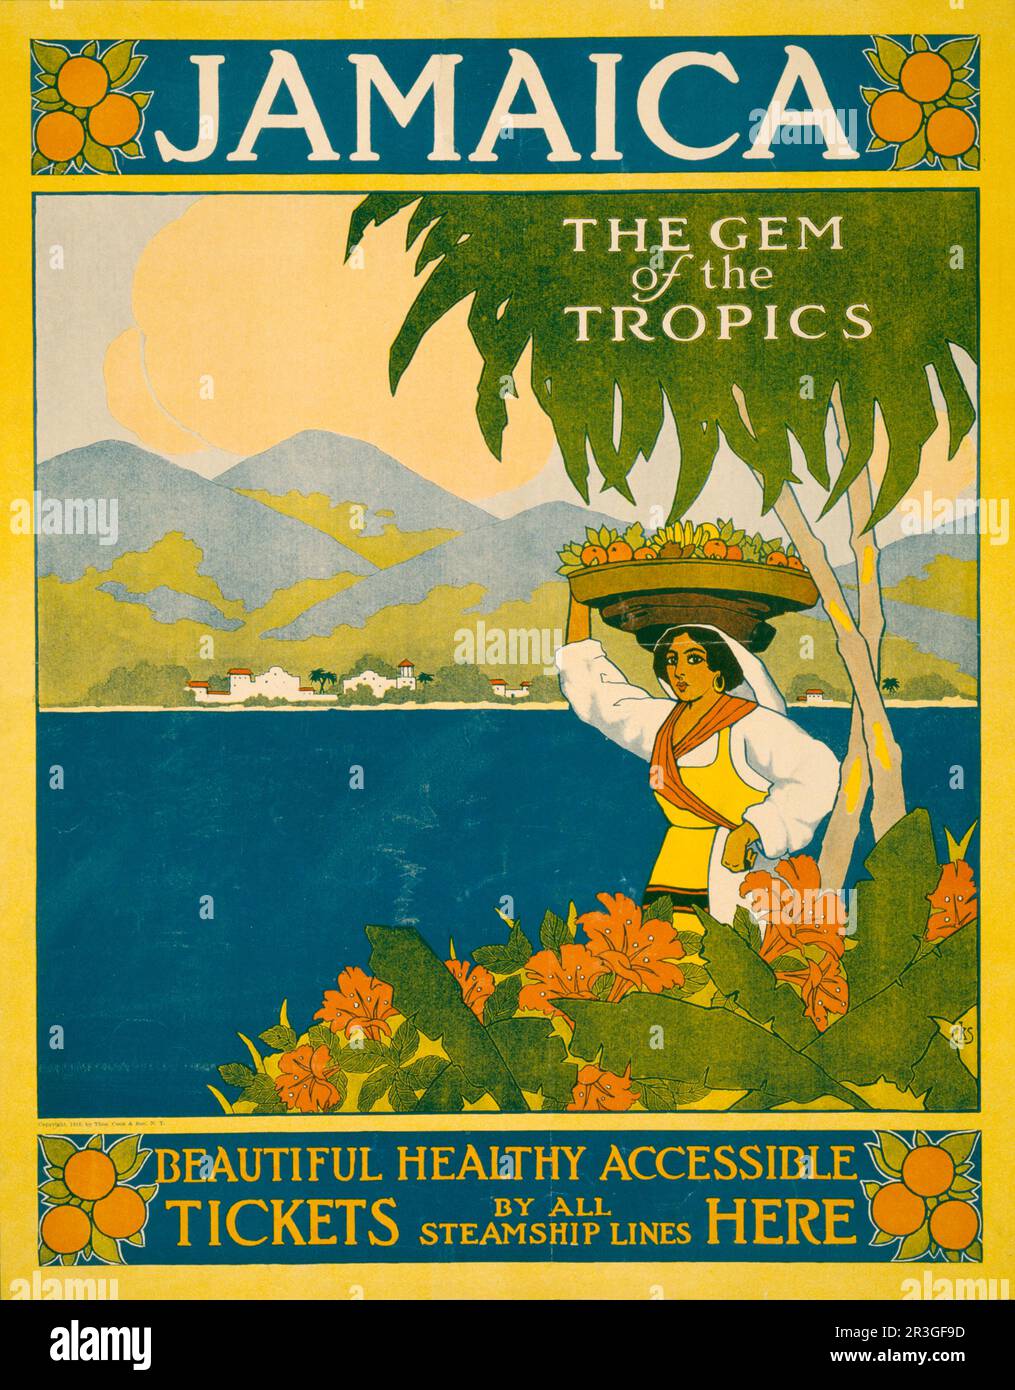 Vintage travel poster for Jamaica, the gem of the tropics, circa 1910. Stock Photo